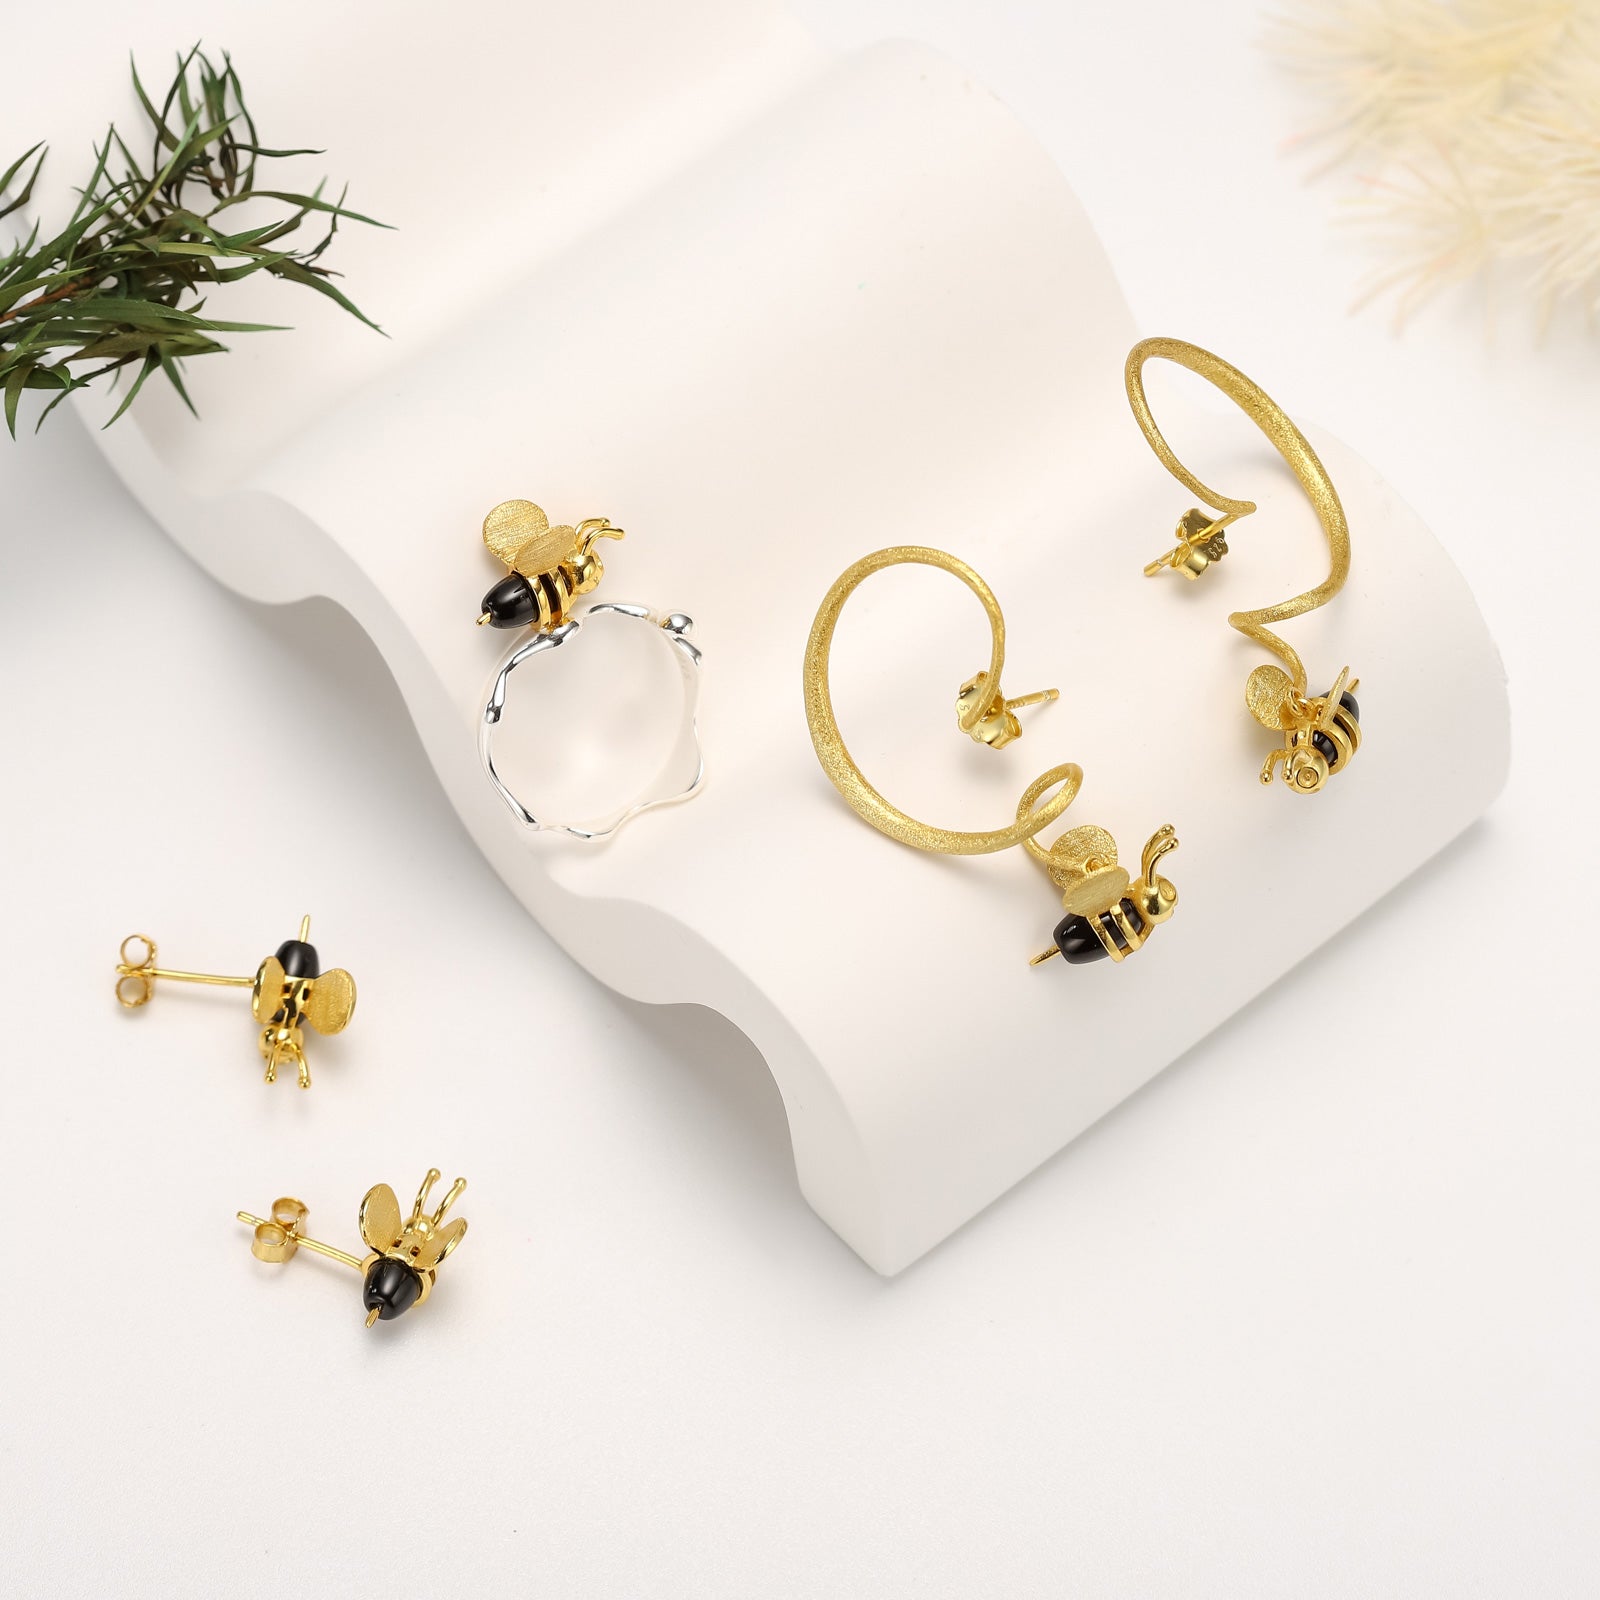 Bee & Dripping Honey Ring Silver Jewelry Set